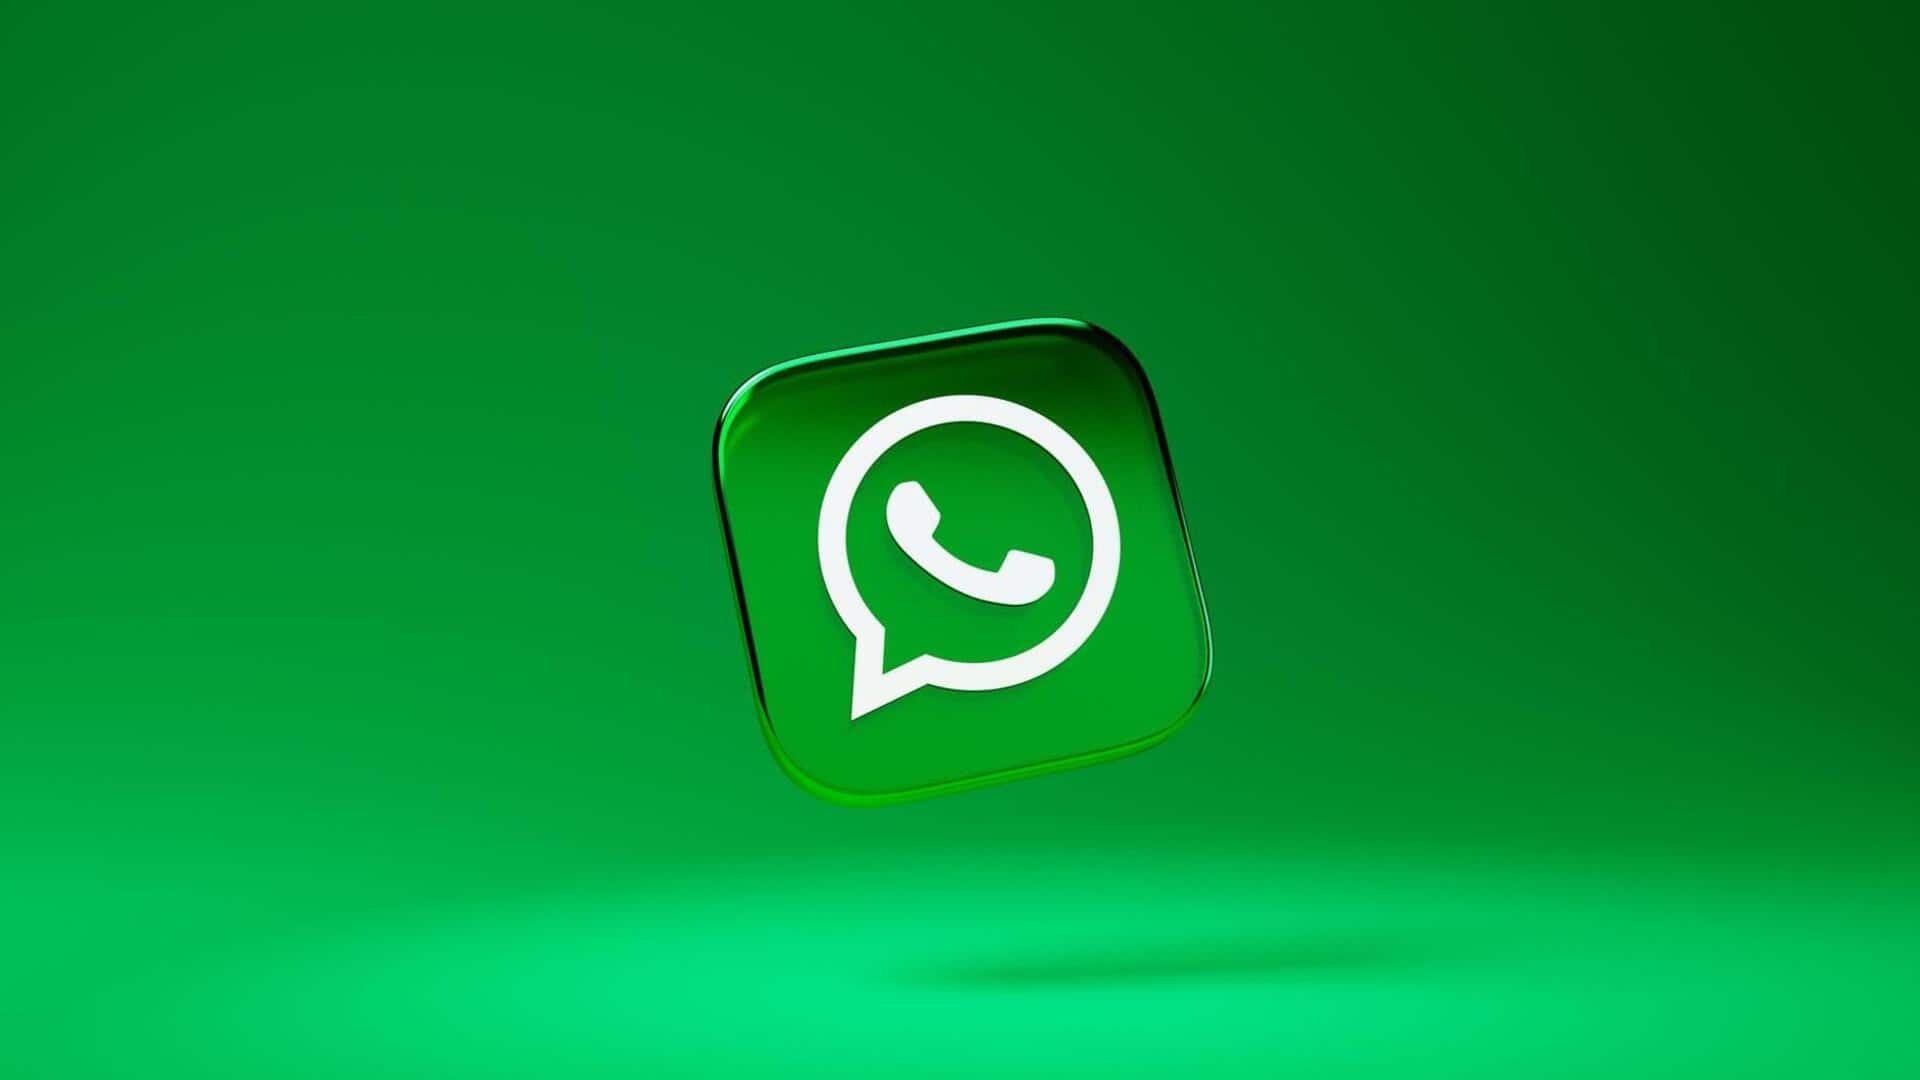 WhatsApp releases automatic security code verification feature: How it works